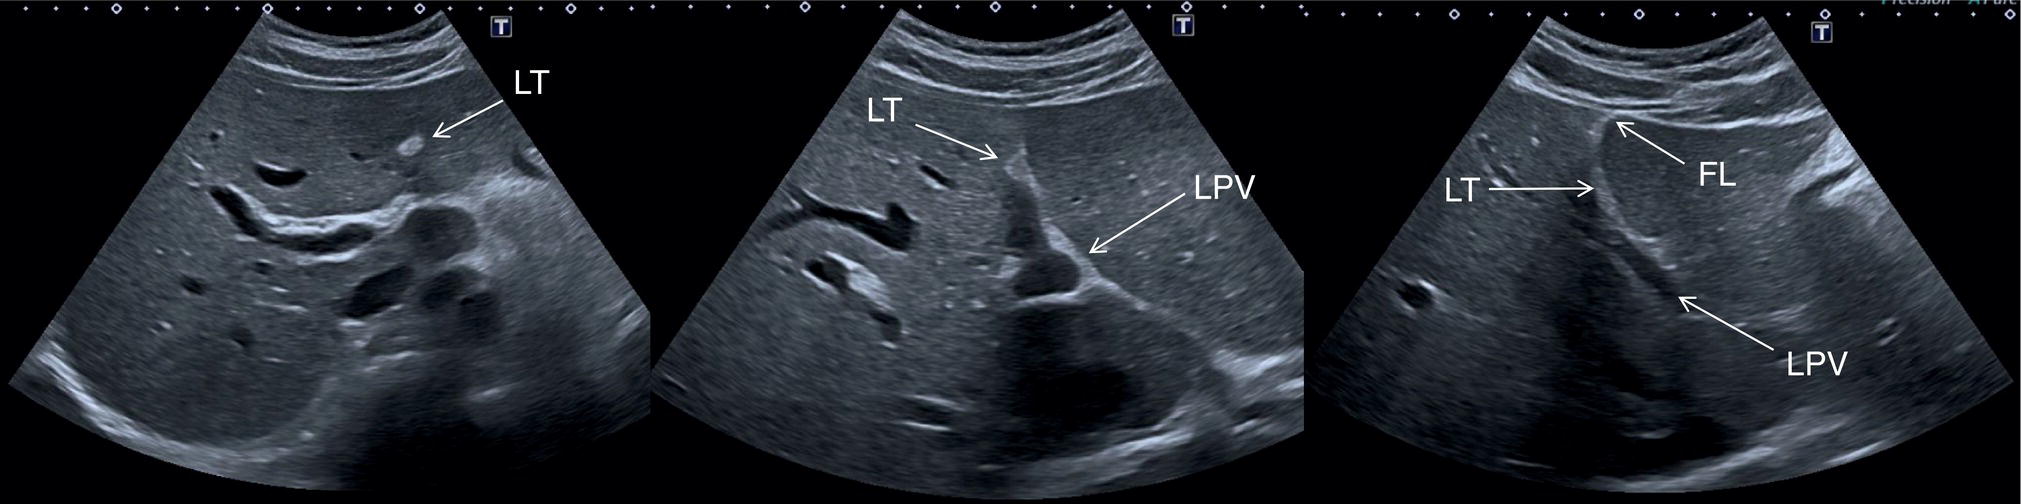 An ultrasound scan image showing three images. 1. The Ligamentum teres is shown. 2. The Ligamentum teres and the left branch of the portal vein are shown. 3. The Ligamentum teres, left branch of the portal vein, and falciform ligament are shown.